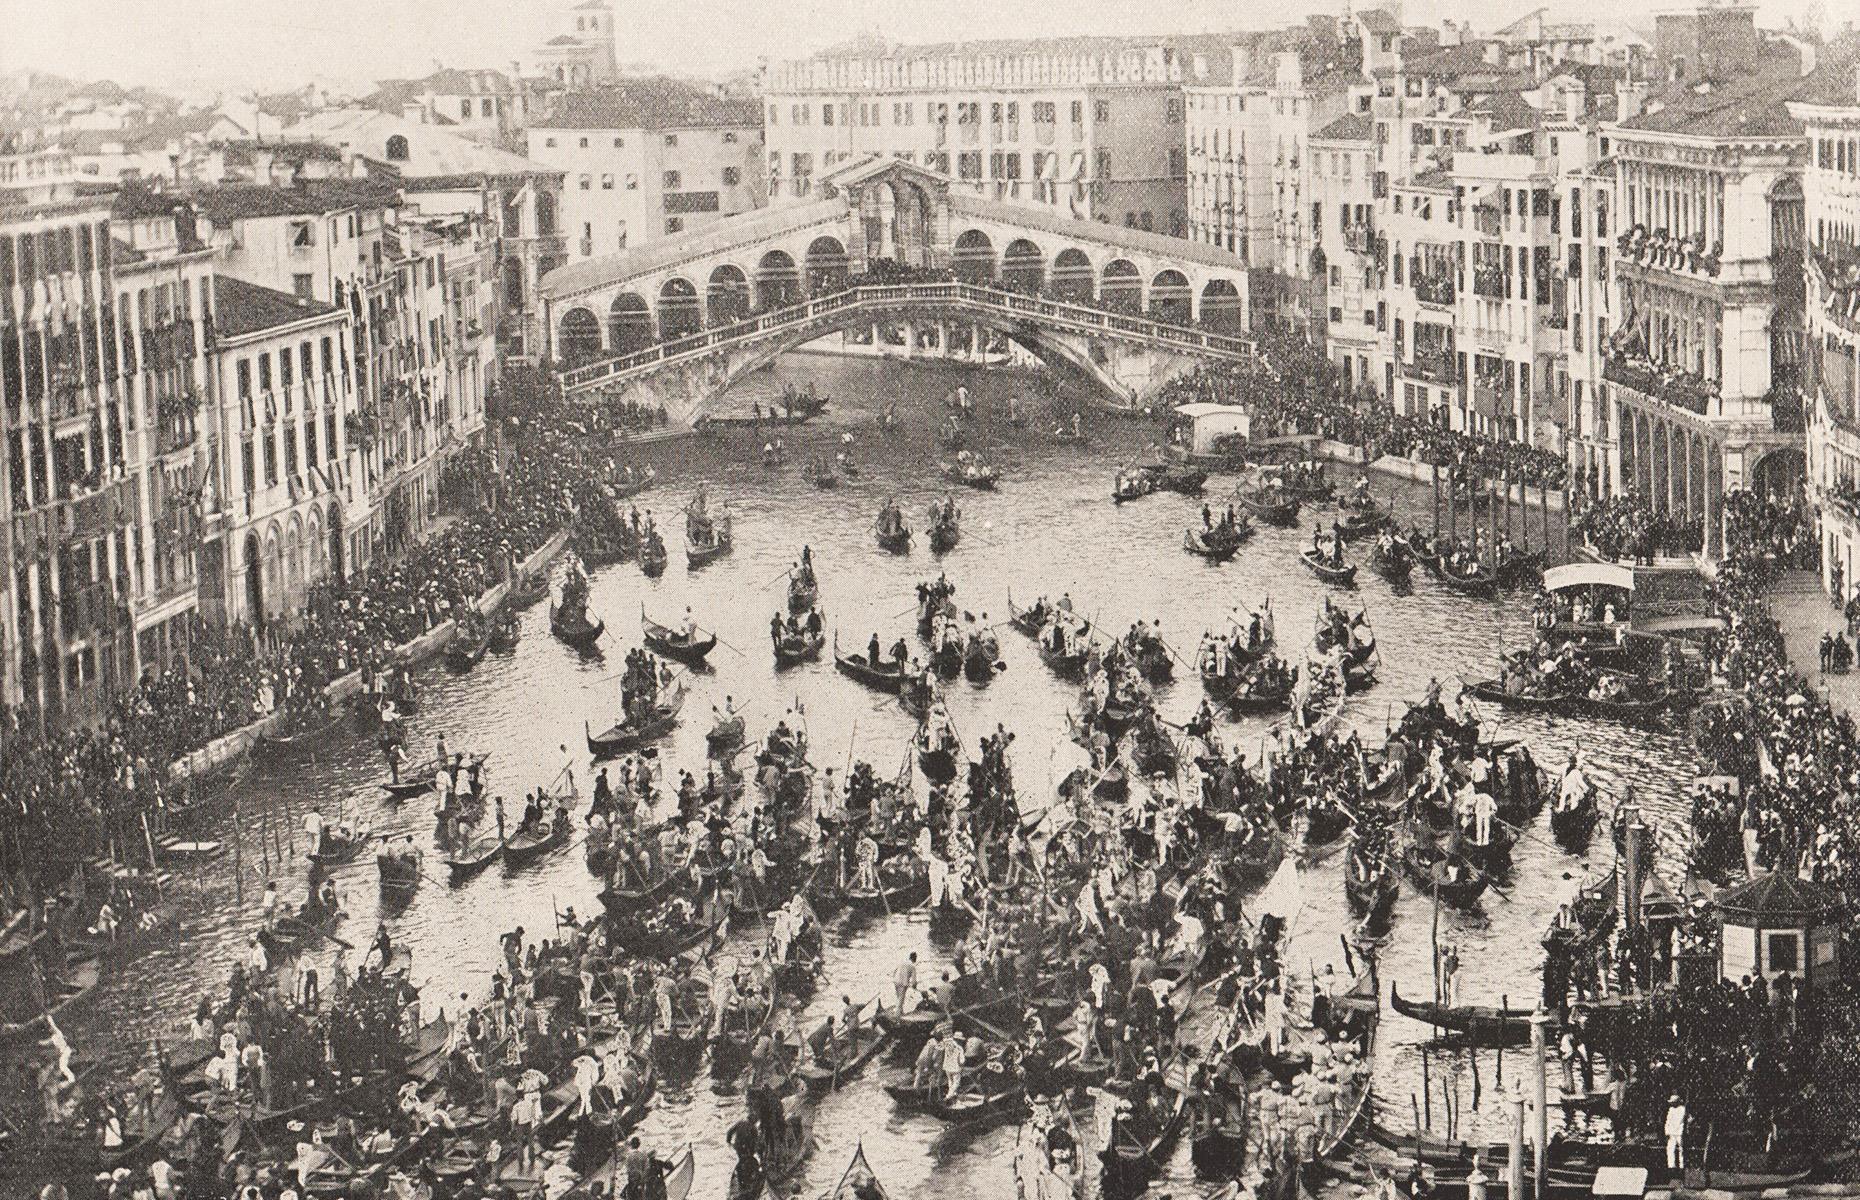 <p>Even before 30 million visitors began descending upon Venice each year, this magical city on the water was accustomed to crowds. Here we see gondolas crammed in front of the Rialto Bridge to celebrate one of the city’s fete days in 1895. These flat-bottomed boats were once colorful and richly decorated but a law passed in the 16th century stated that all gondolas must be painted black, as competition between the local nobles to have the fanciest boat was deemed unseemly, and they remain that shade to this day.</p>